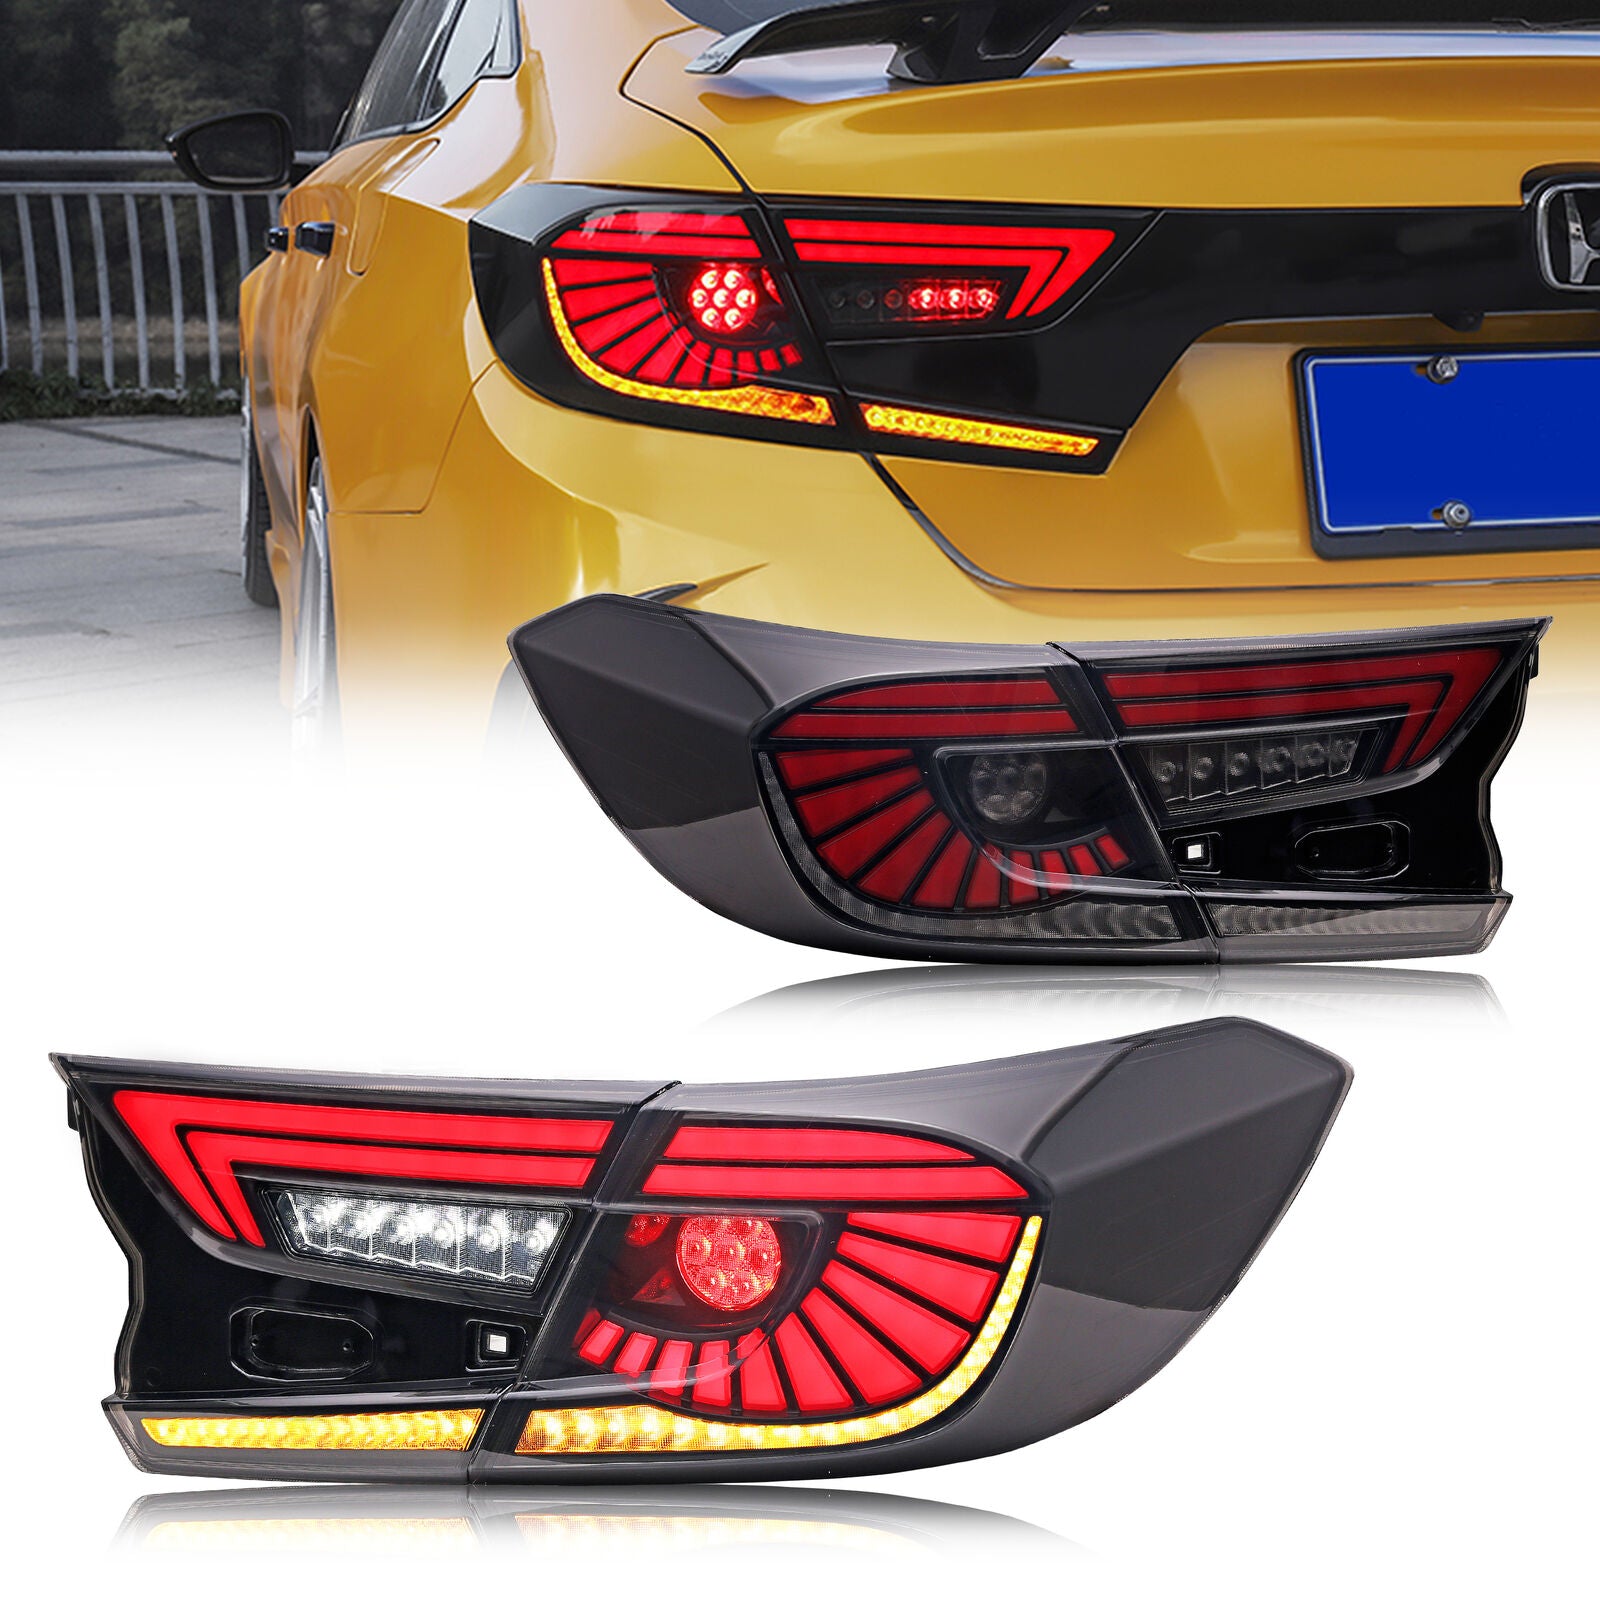 inginuity time LED Clear White Eagle Eye V6 Tail Lights for Honda Accord  10th Gen 2018 2019 2020 2021 2022 Animation DRL Sequential Indicator Rear 